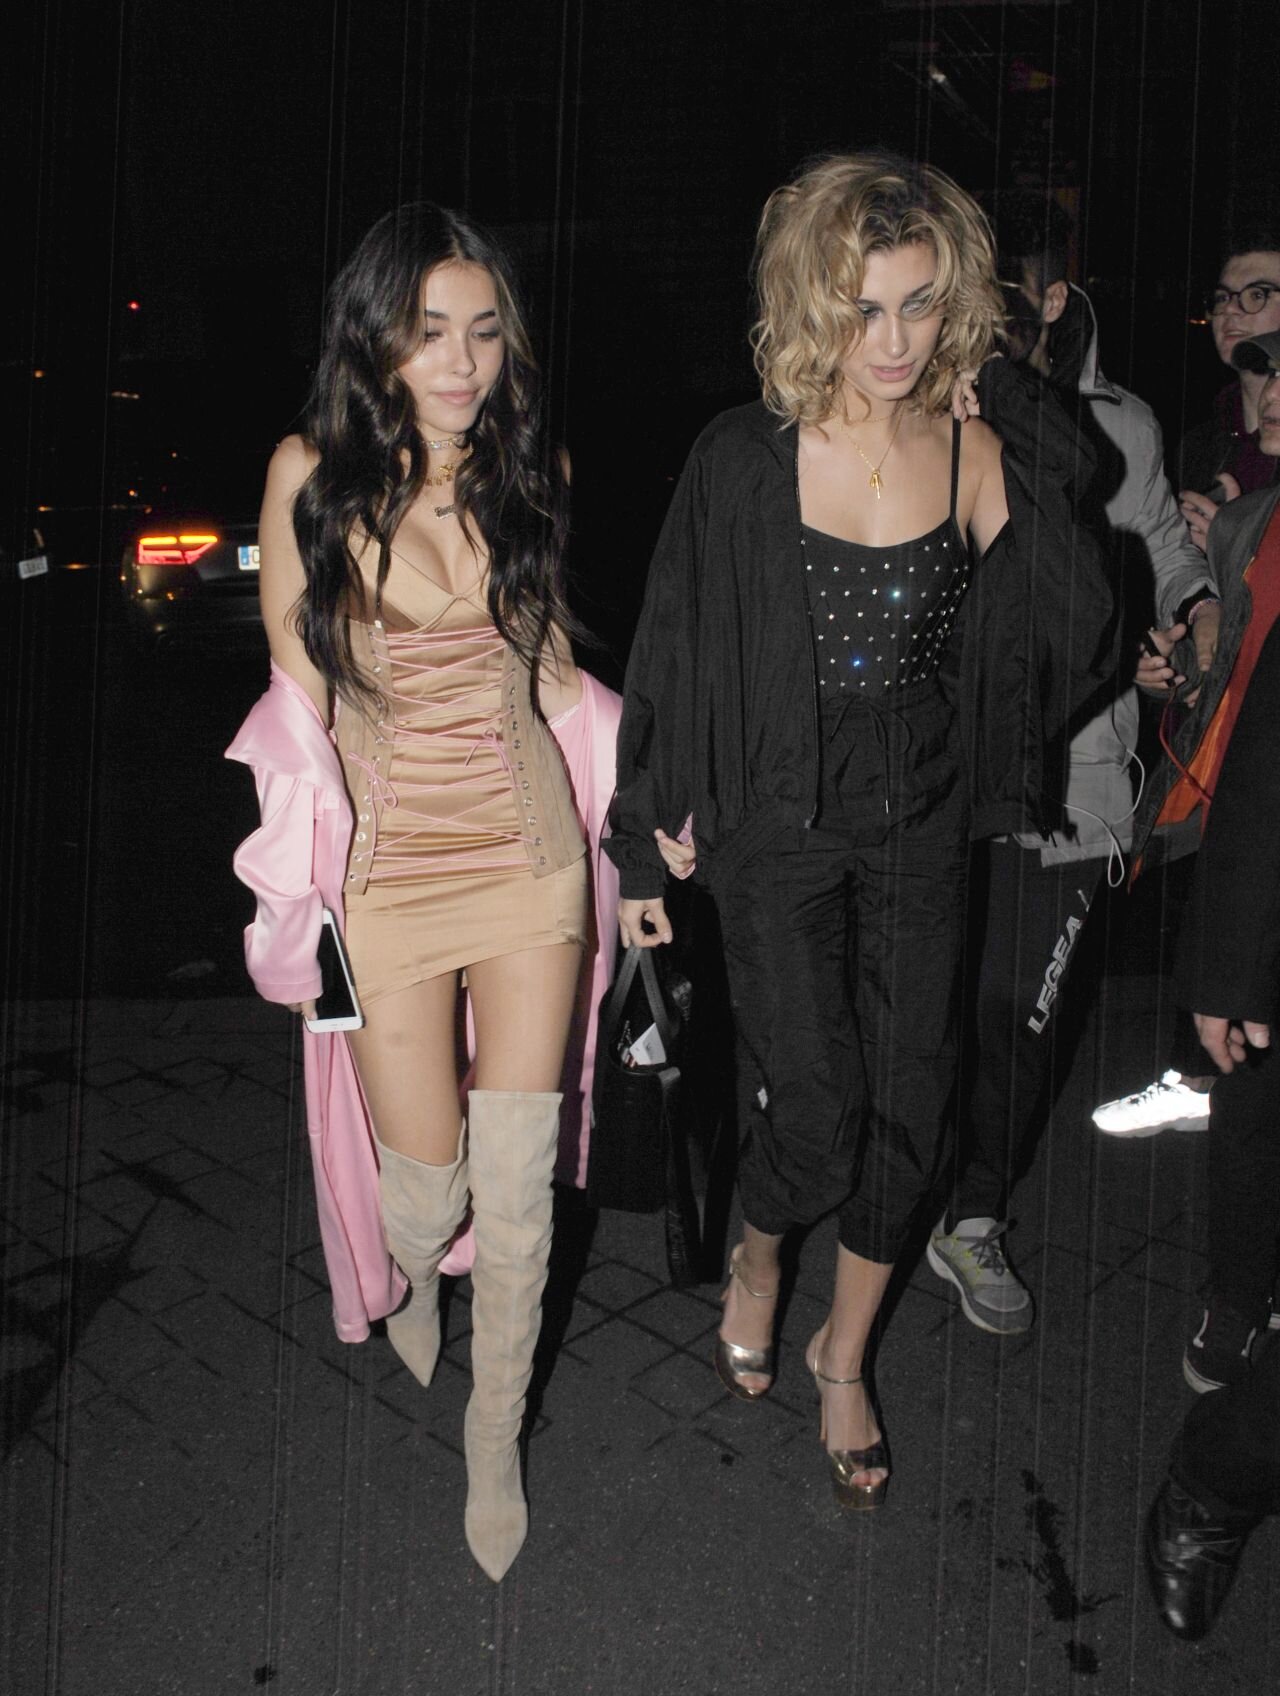 madison-beer-night-out-with-hailey-baldwin-in-paris-3-4-2017-1.jpg